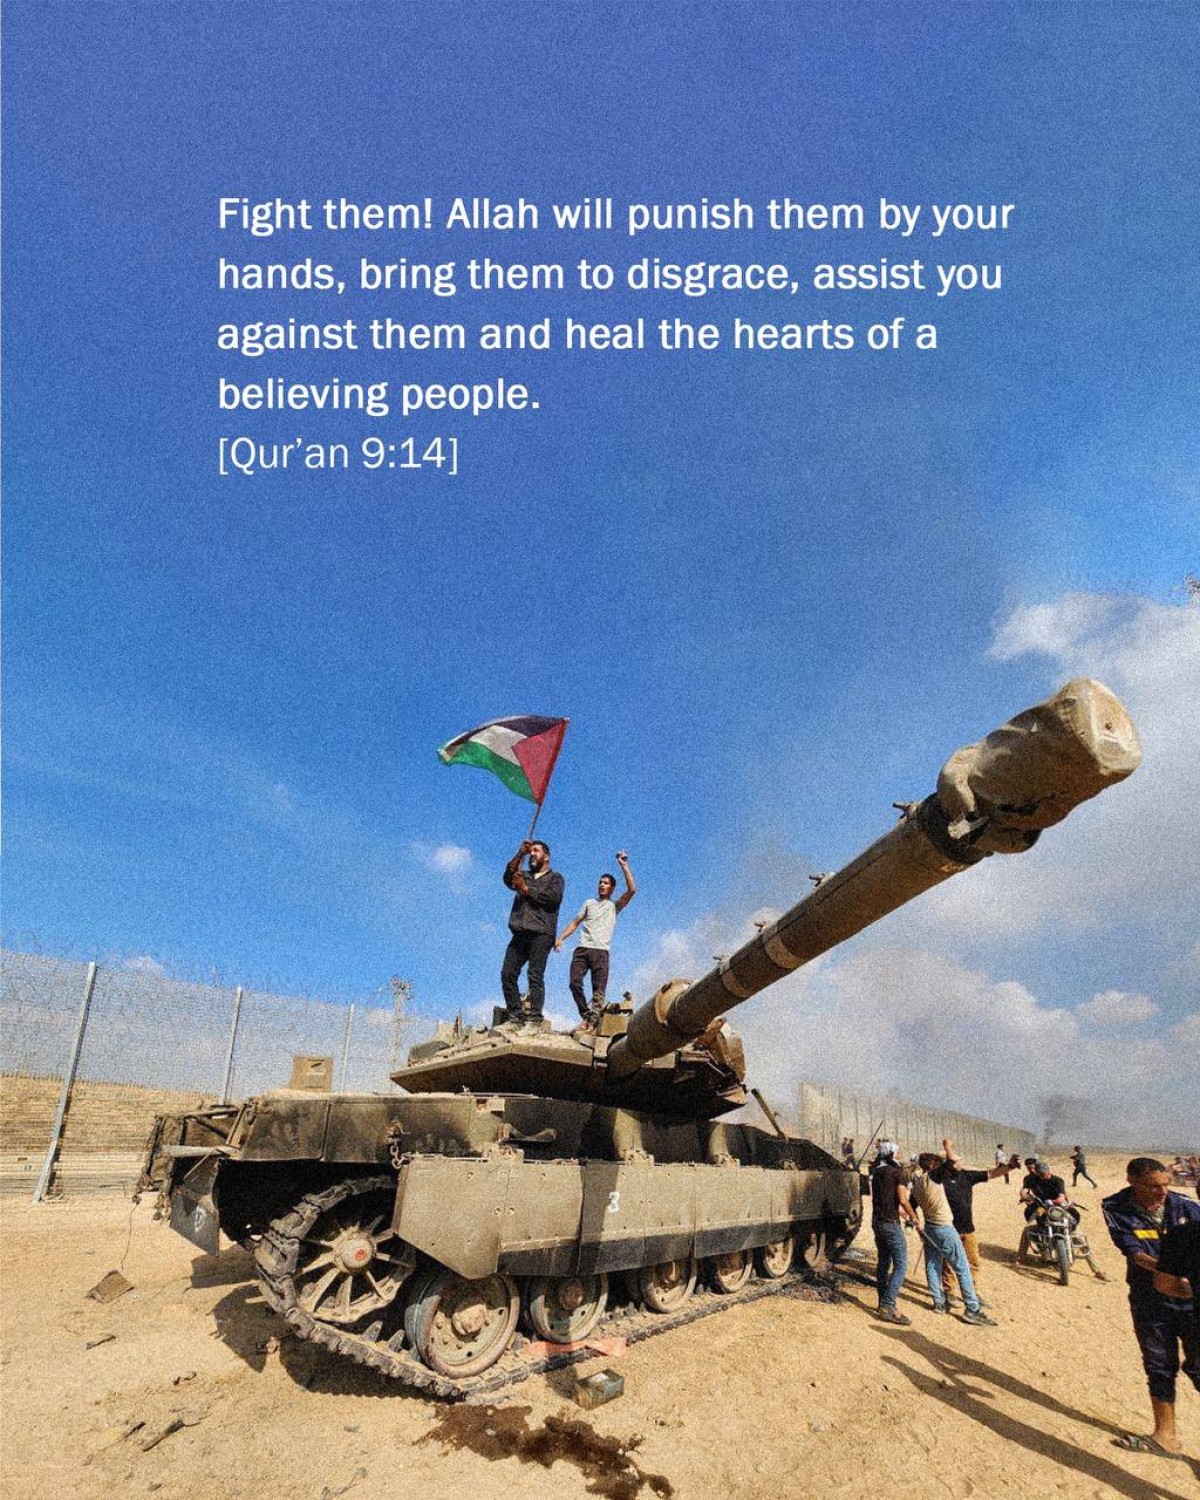 Fight them! Allah will punish them by your hands, bring them to disgrace, assist you against them and heal the hearts of a believing people.